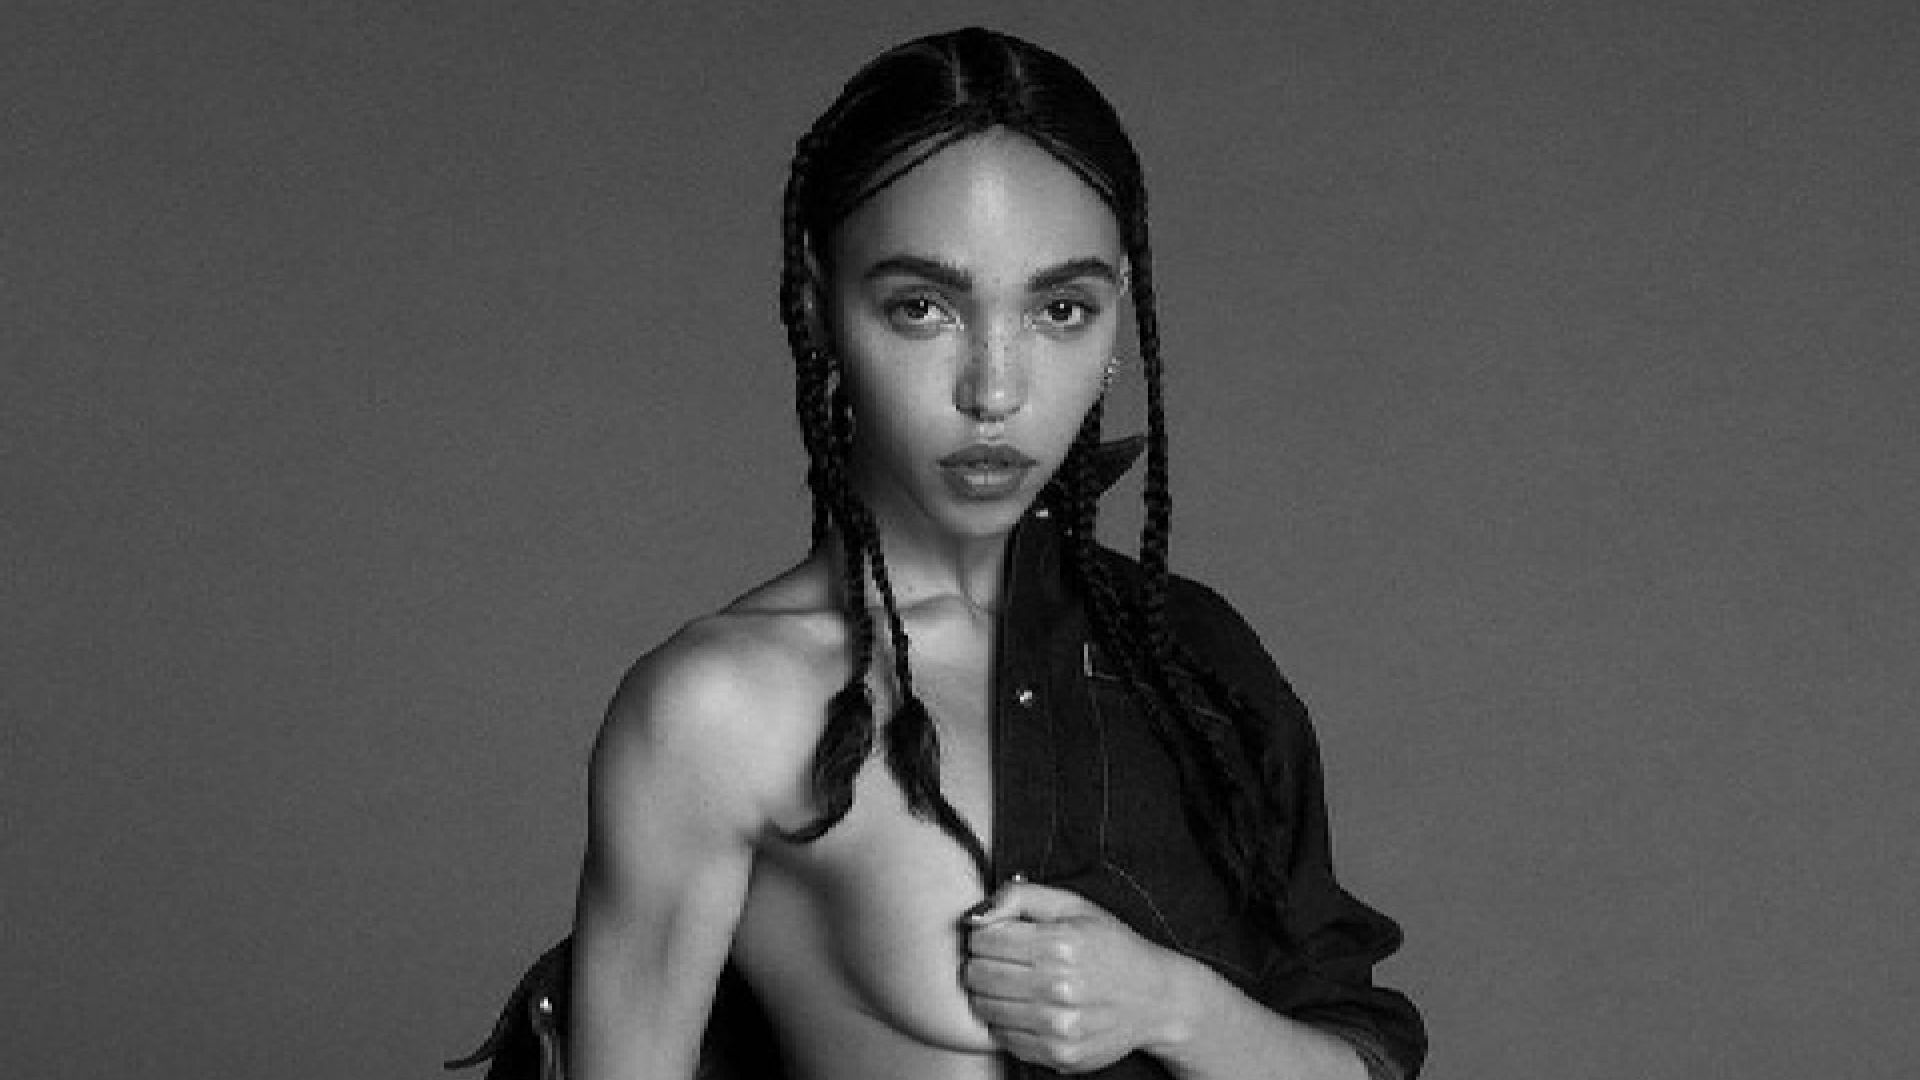 I can't understand why the FKA twigs Calvin Klein ad was banned.